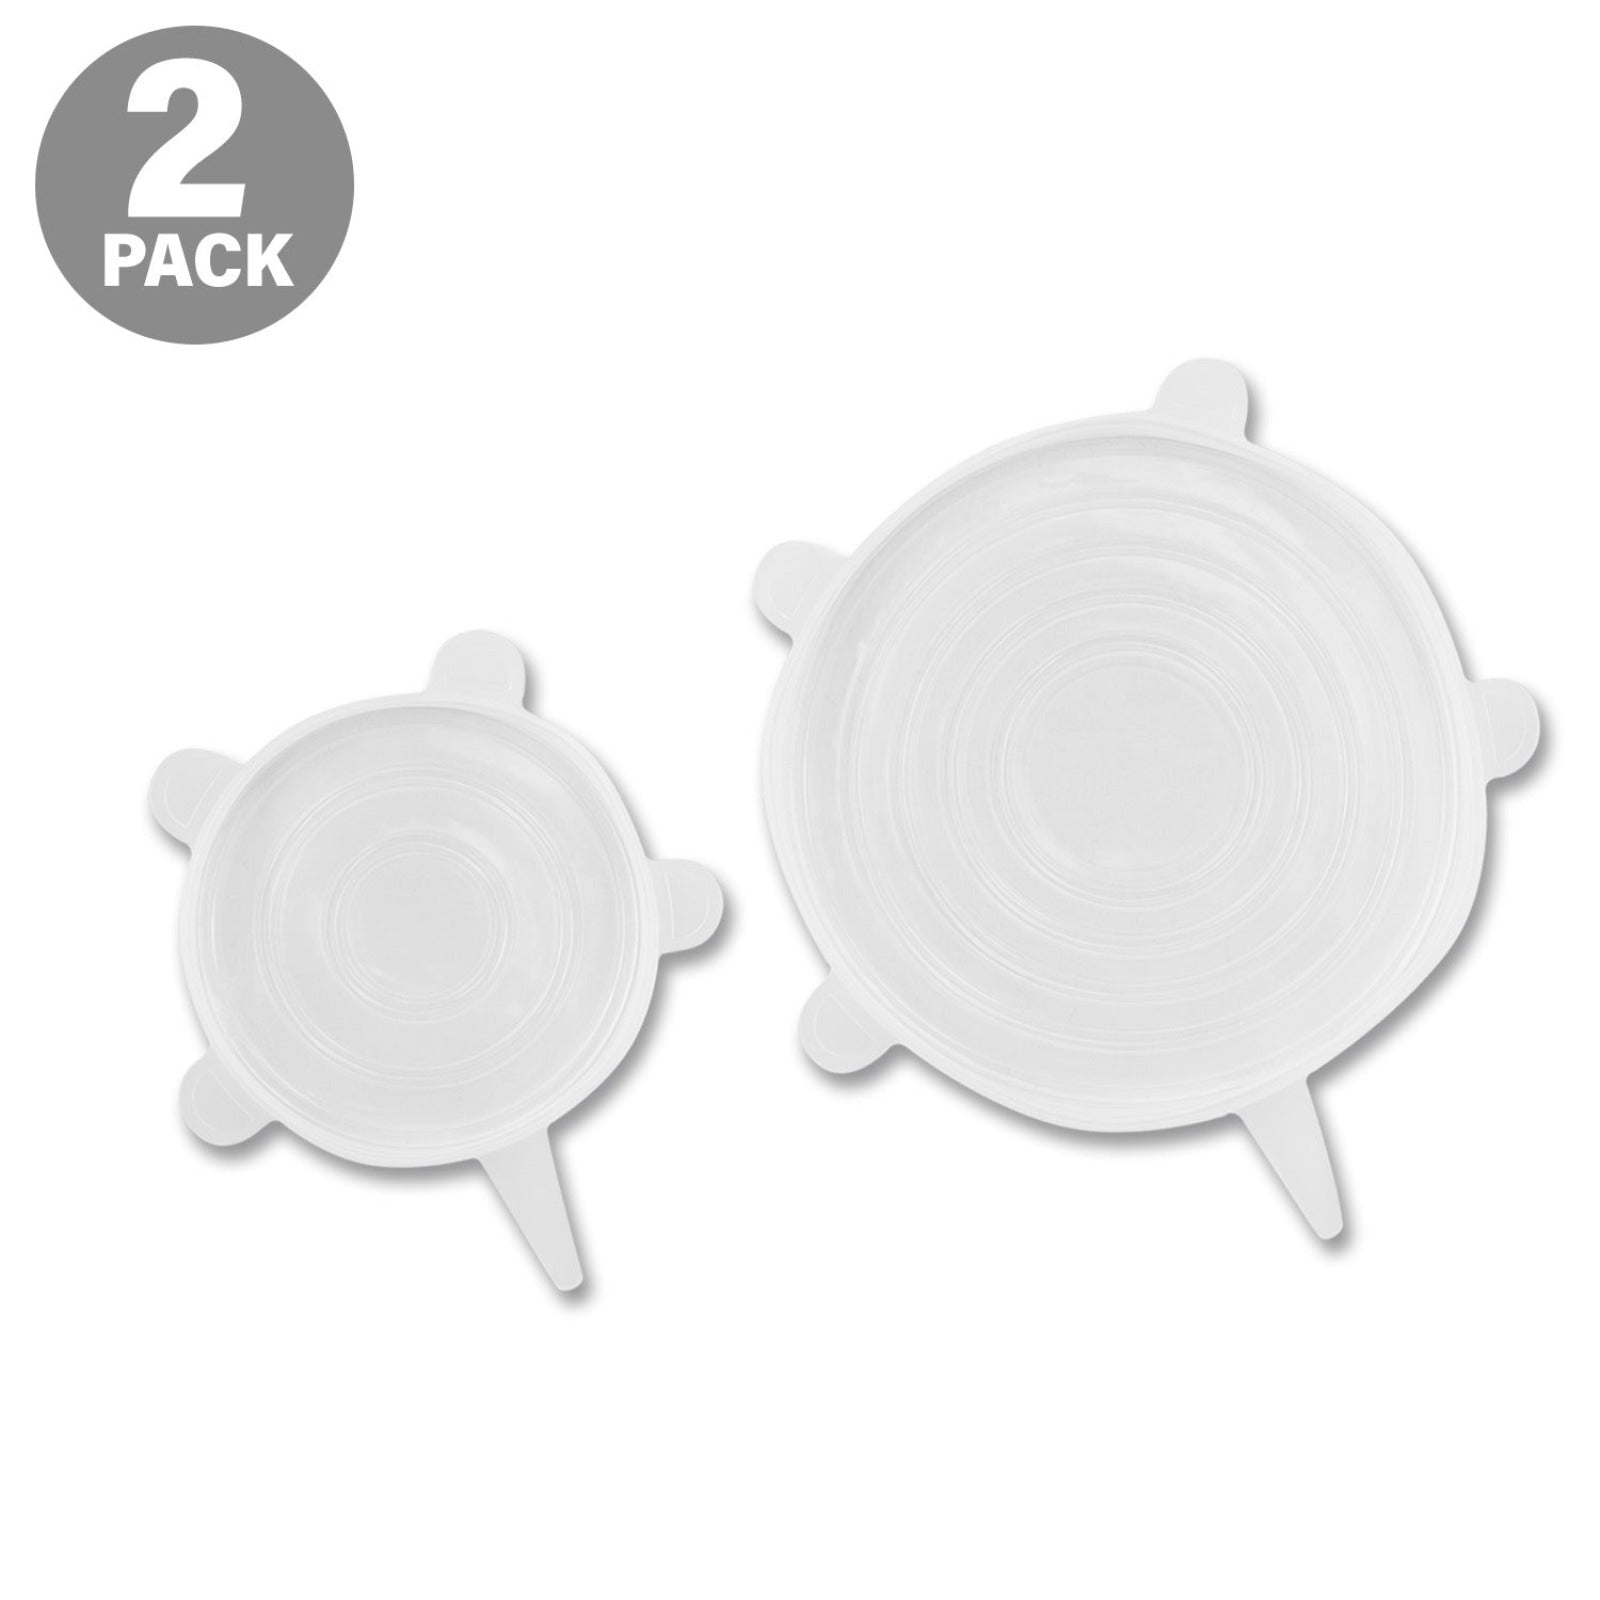 Kleva® Flexi Stretchy Eco Lids - 2 pack  Bunnings Marketplace 2 Pack  